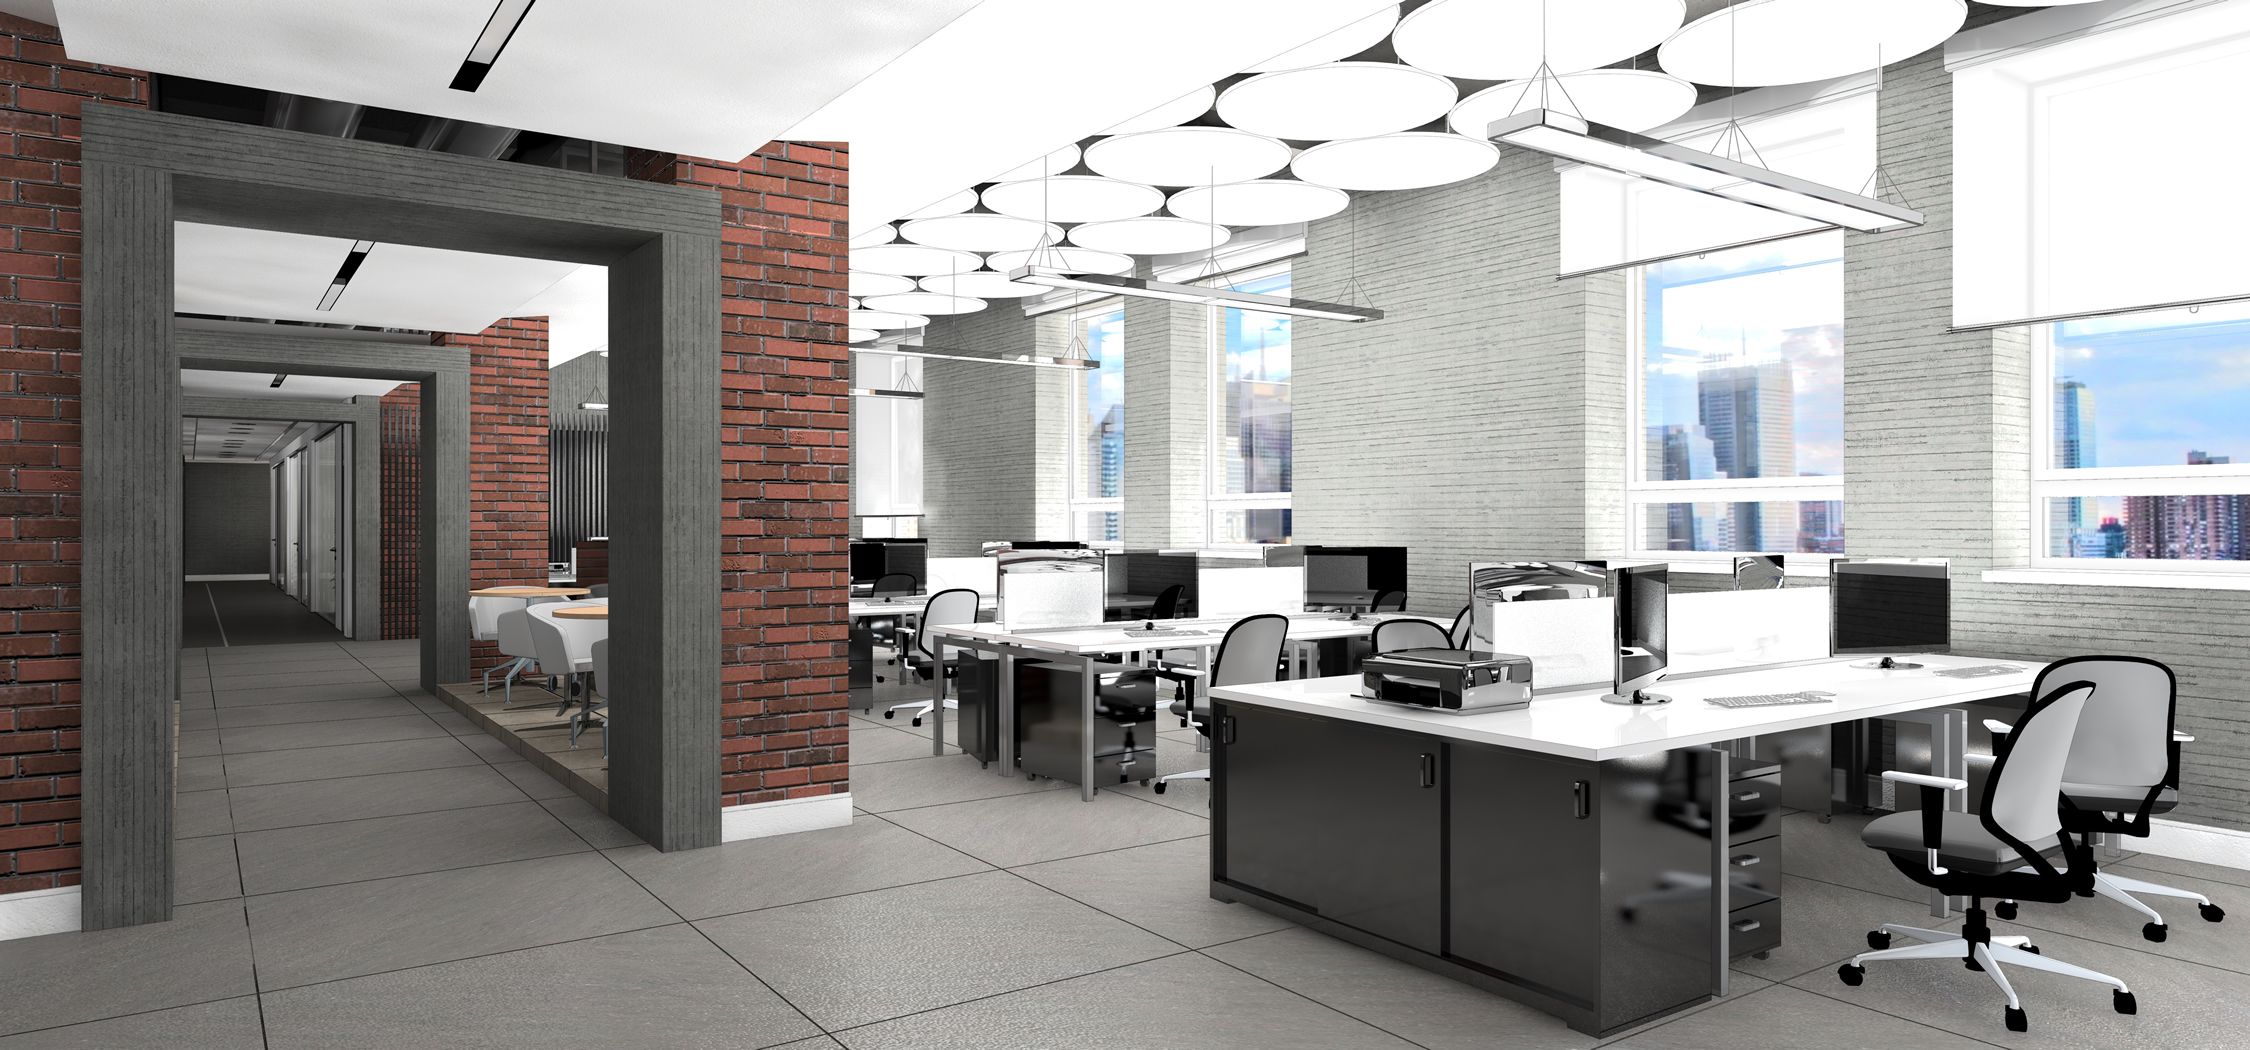 office with neutral colors and lighting